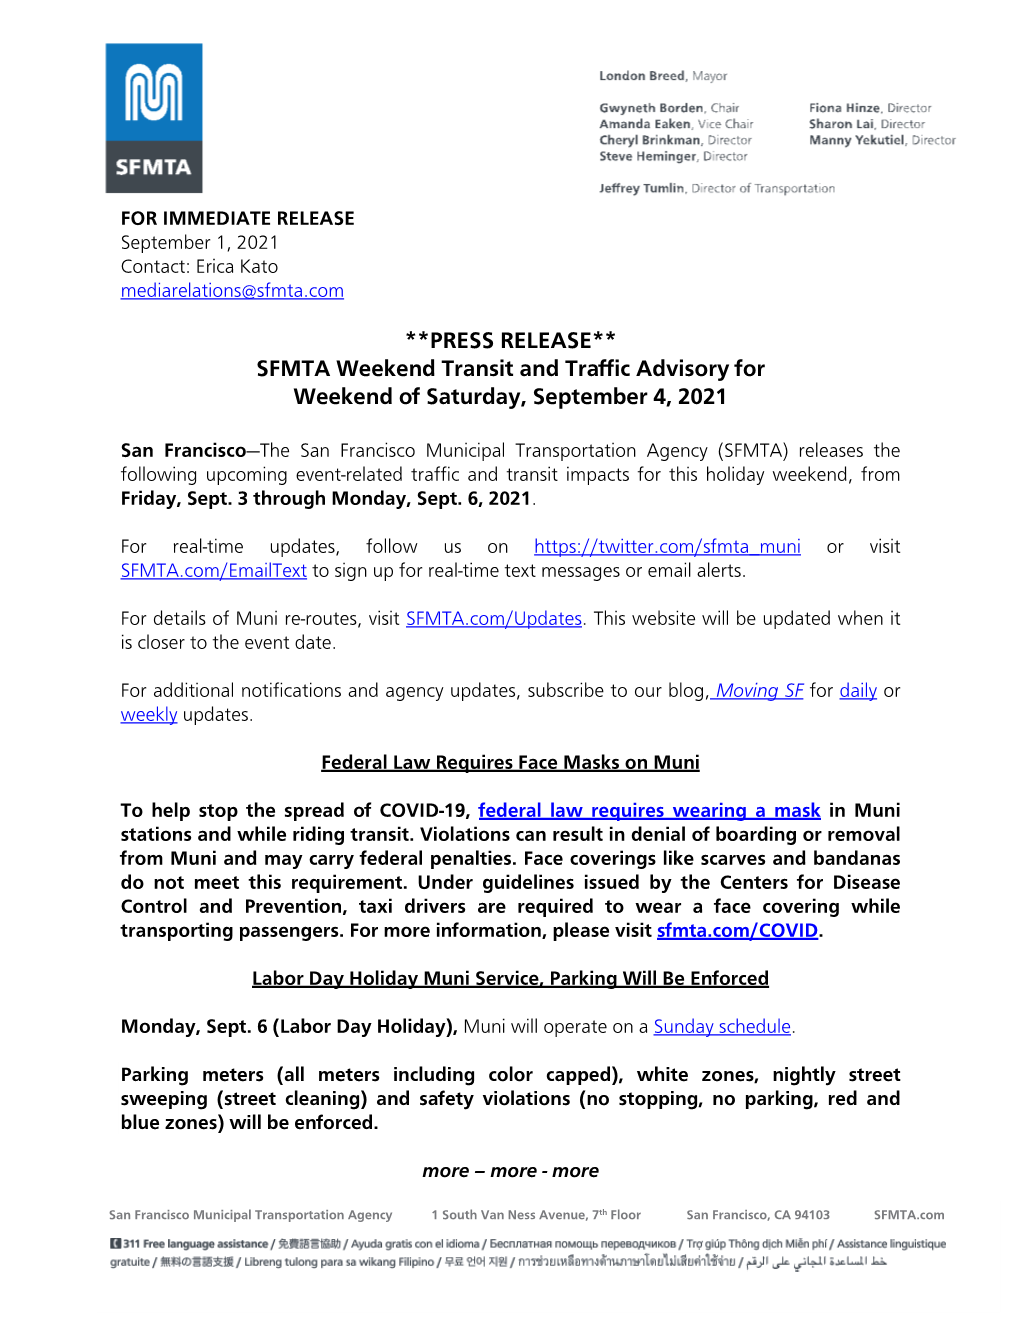 PRESS RELEASE** SFMTA Weekend Transit and Traffic Advisory for Weekend of Saturday, September 4, 2021